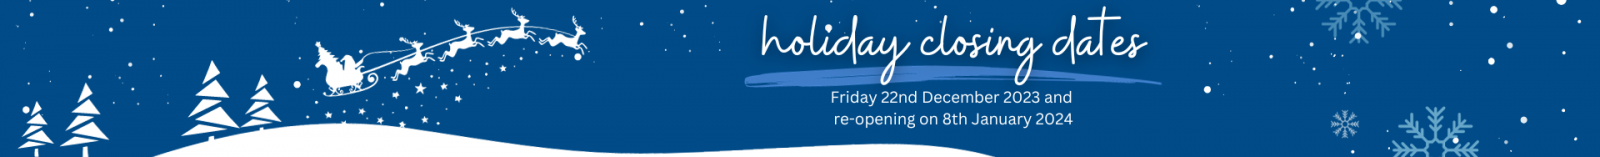 Holiday closing dates: Friday 22nd December 2023. Reopening on 8th January 2024